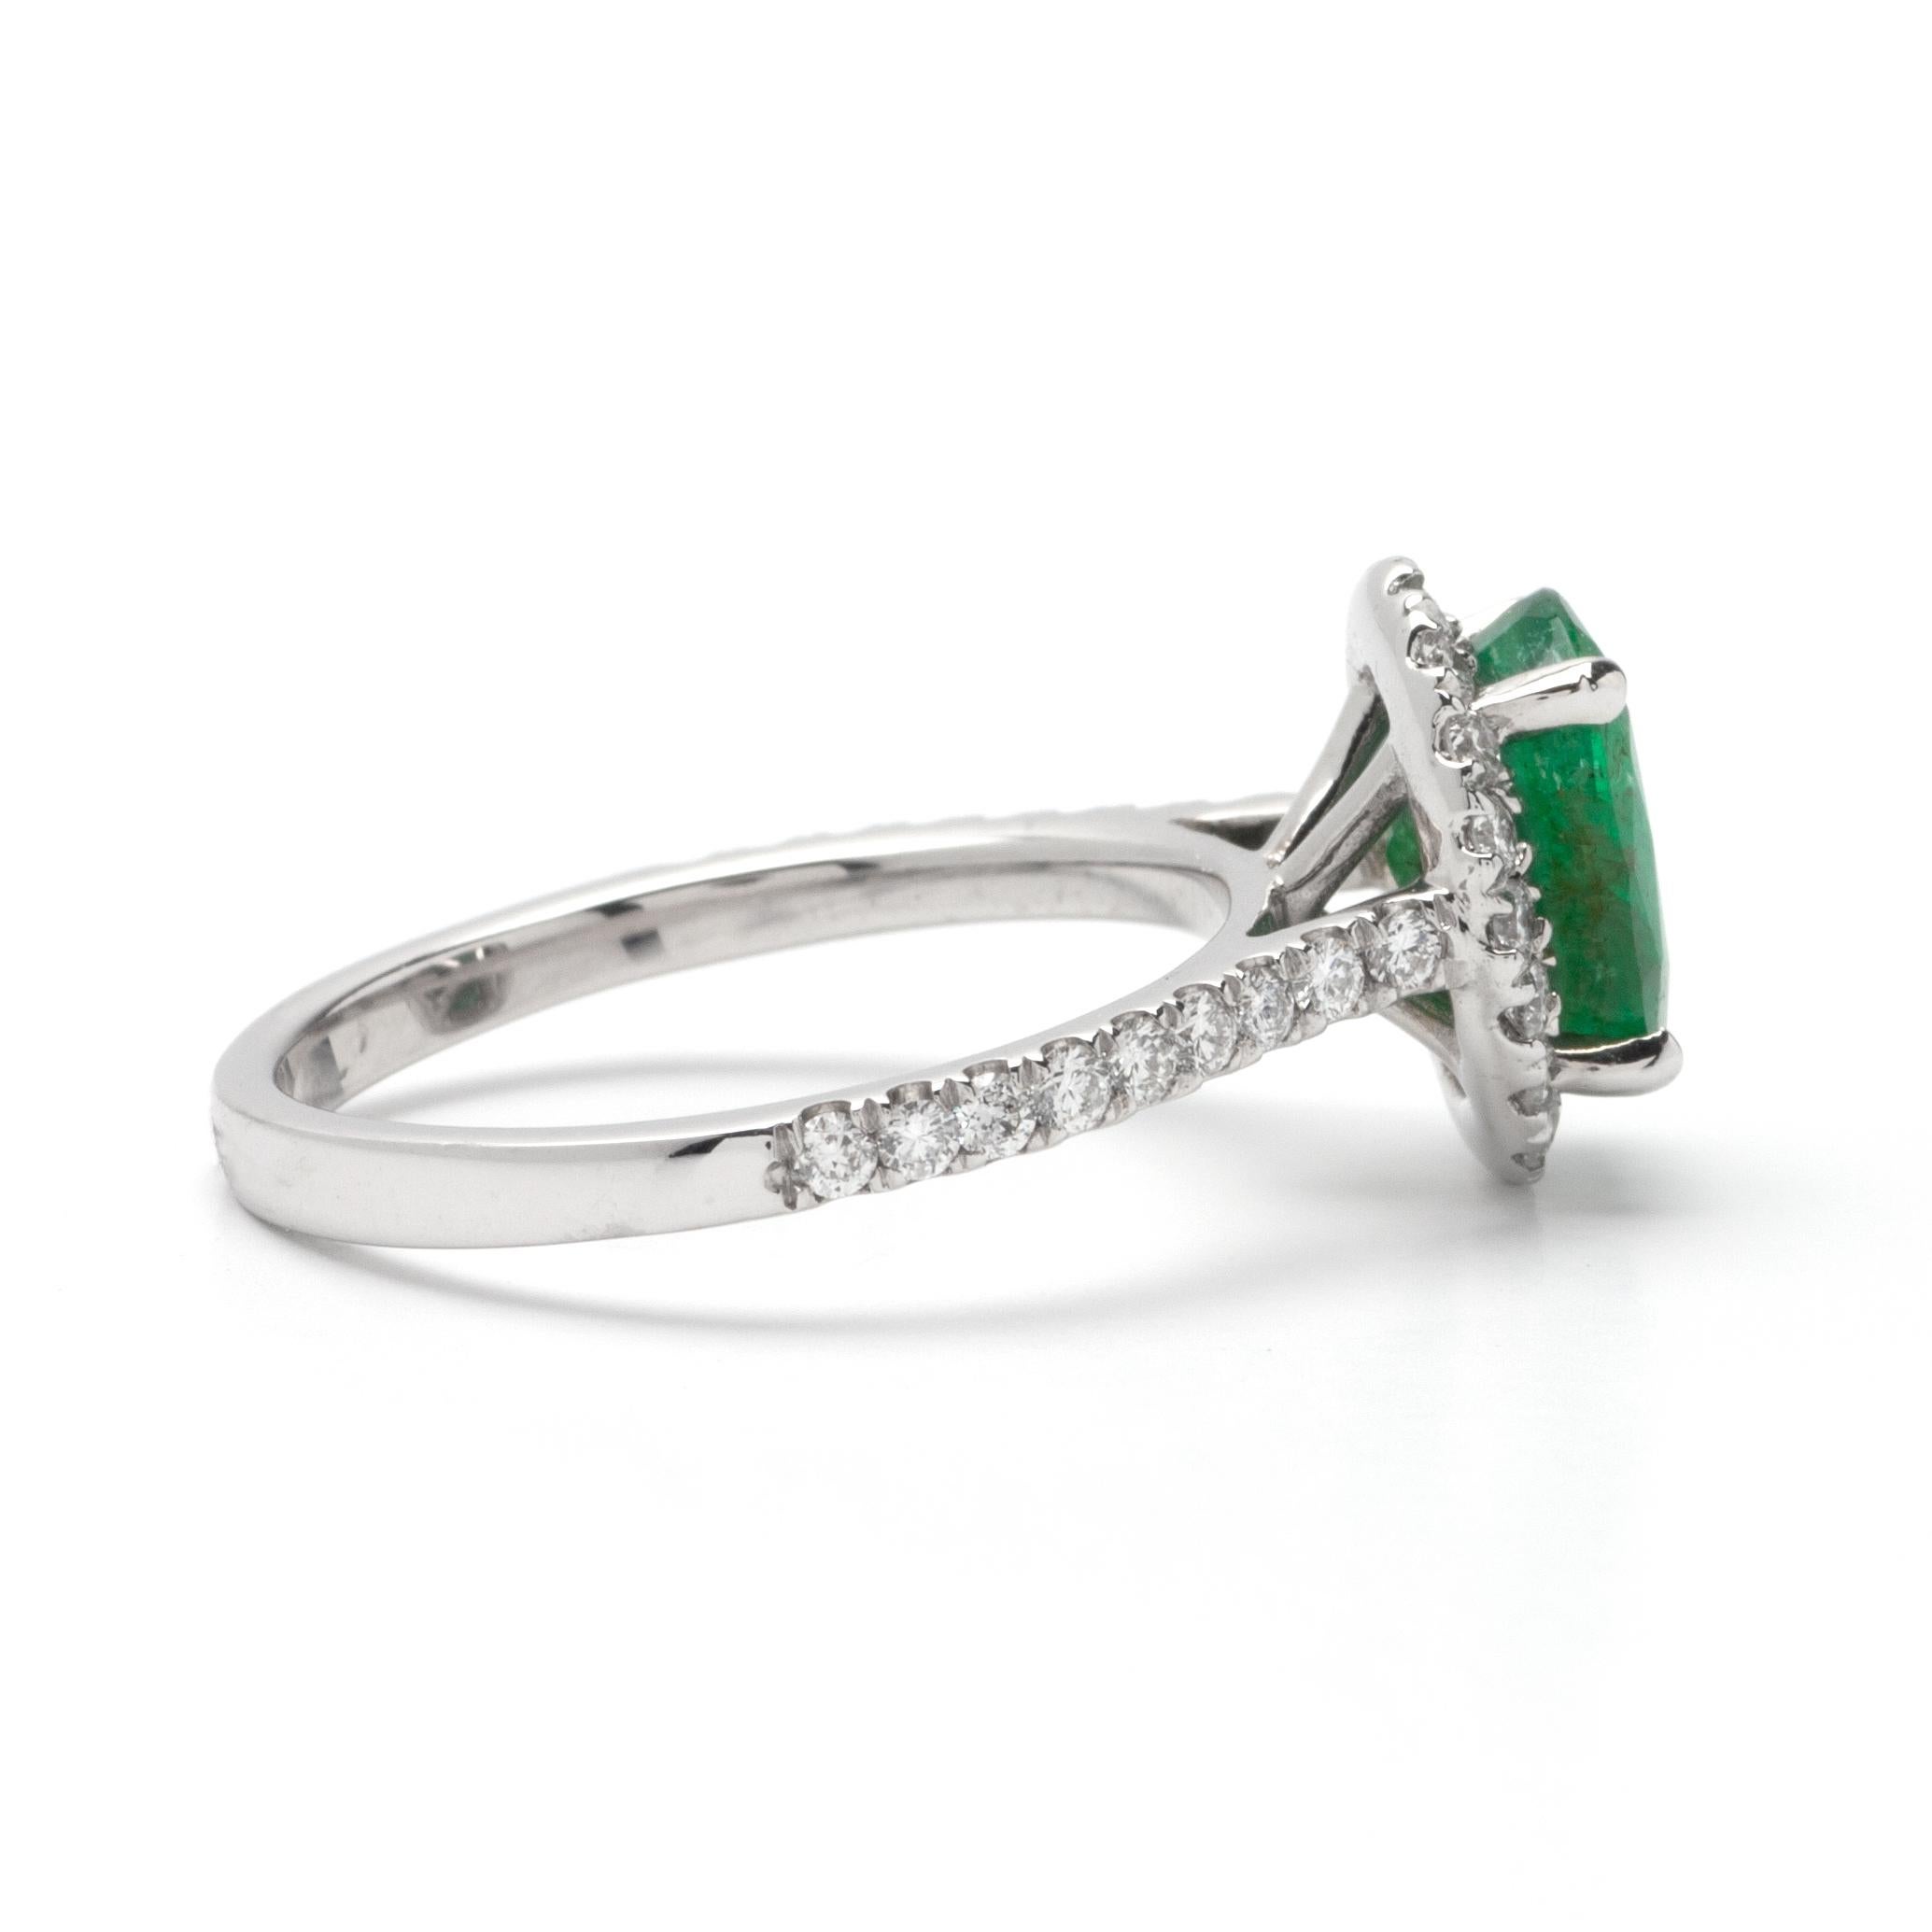 Oval Cut 1.77ct Emerald Halo Ring in 14K White Gold; 0.50ct Side Diamonds For Sale